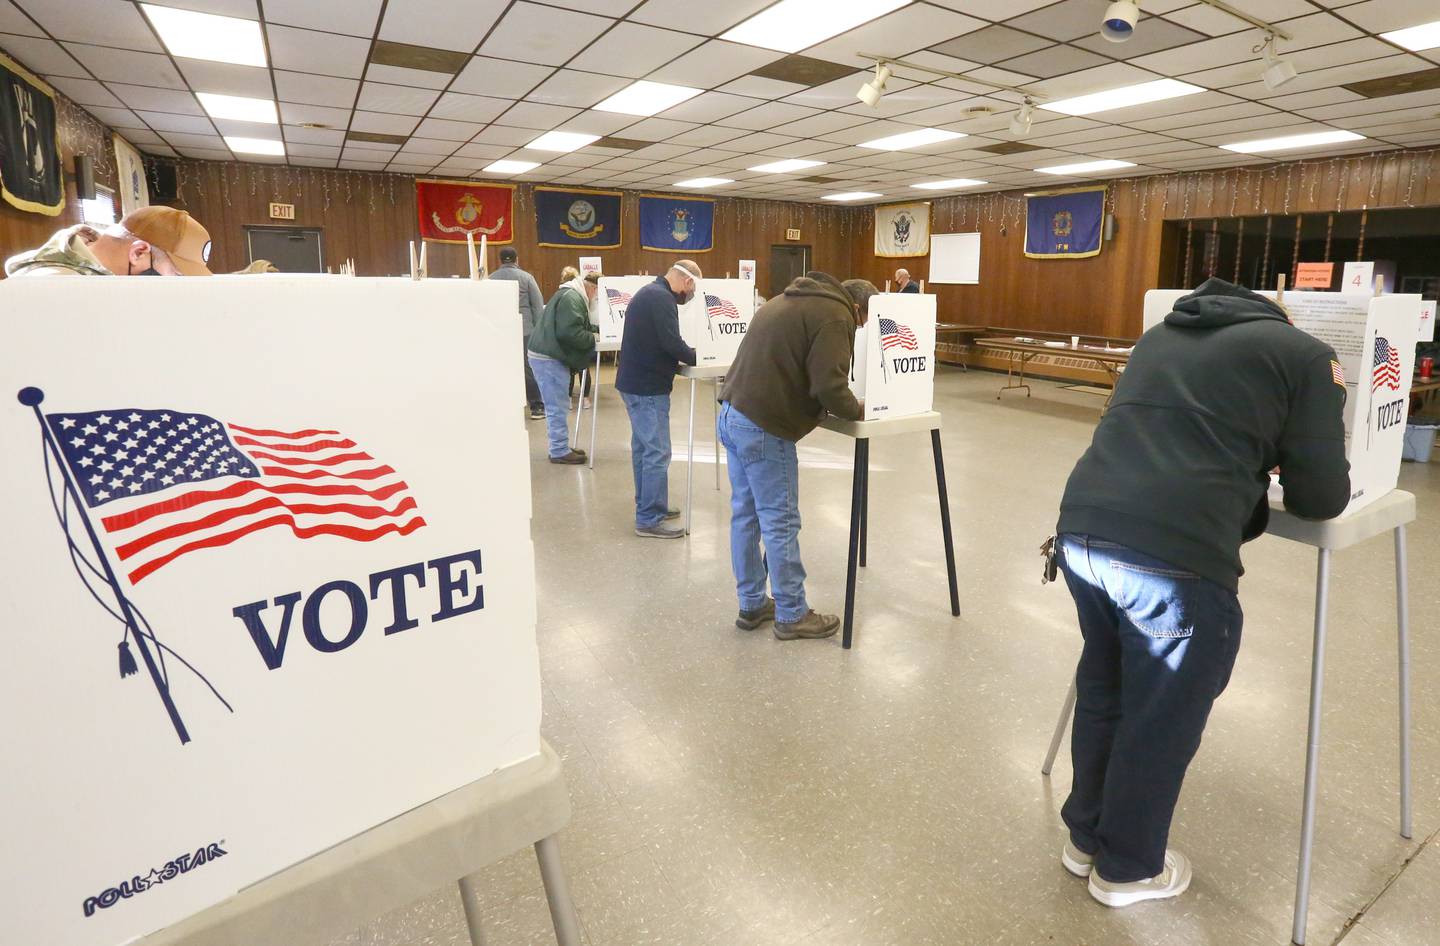 Voters will take the polls again in April for the municipal election.